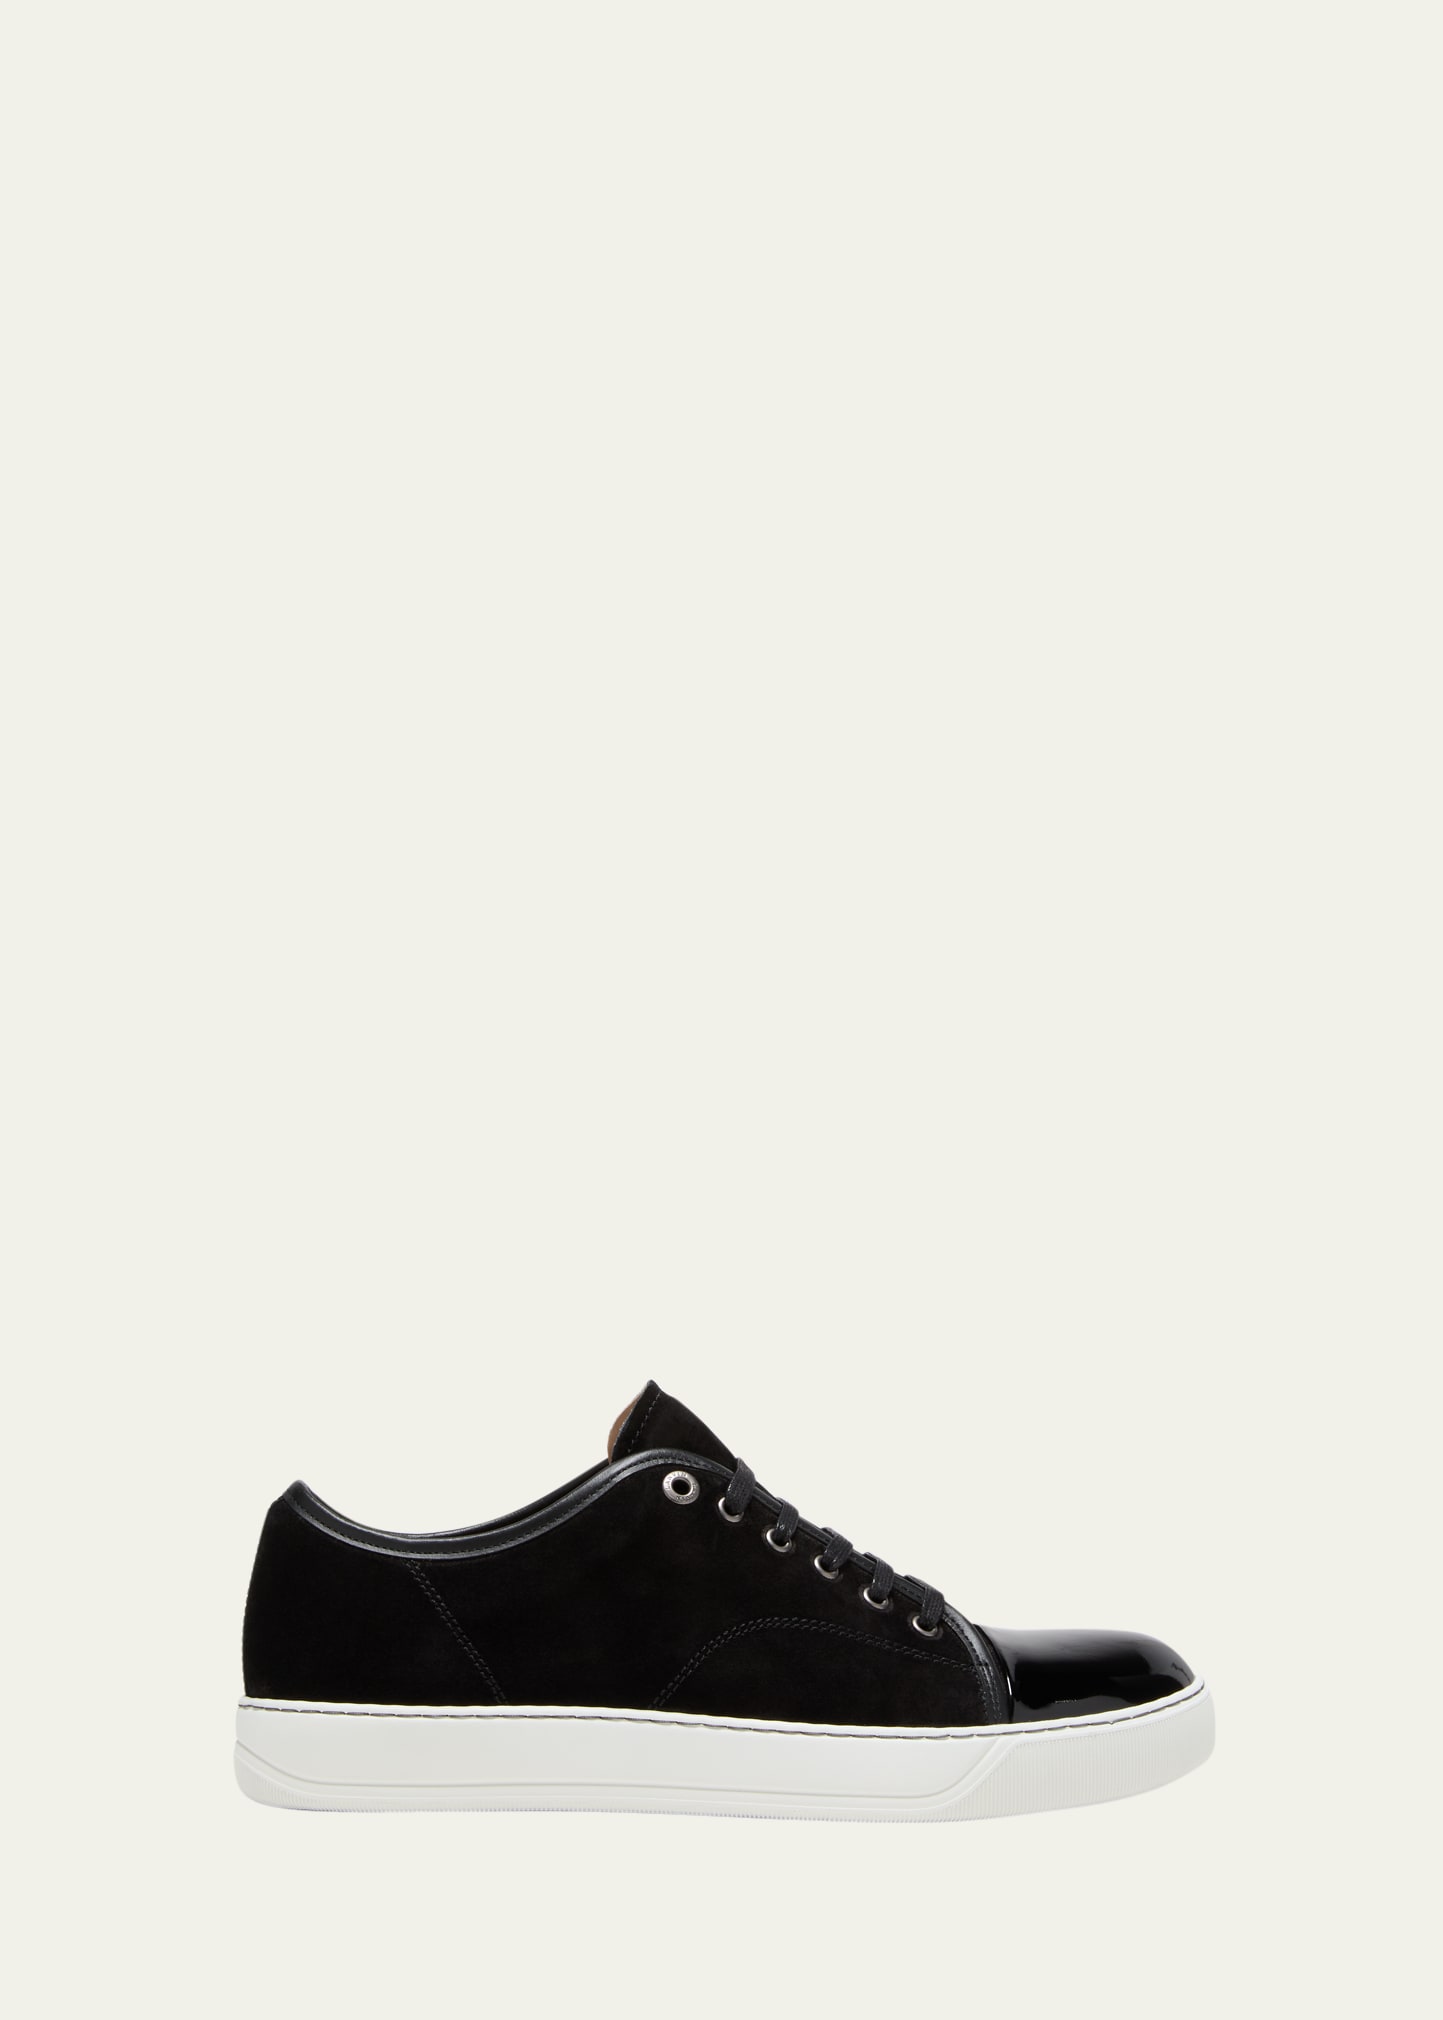 Lanvin Men's Patent Leather/suede Low-top Sneakers In Black